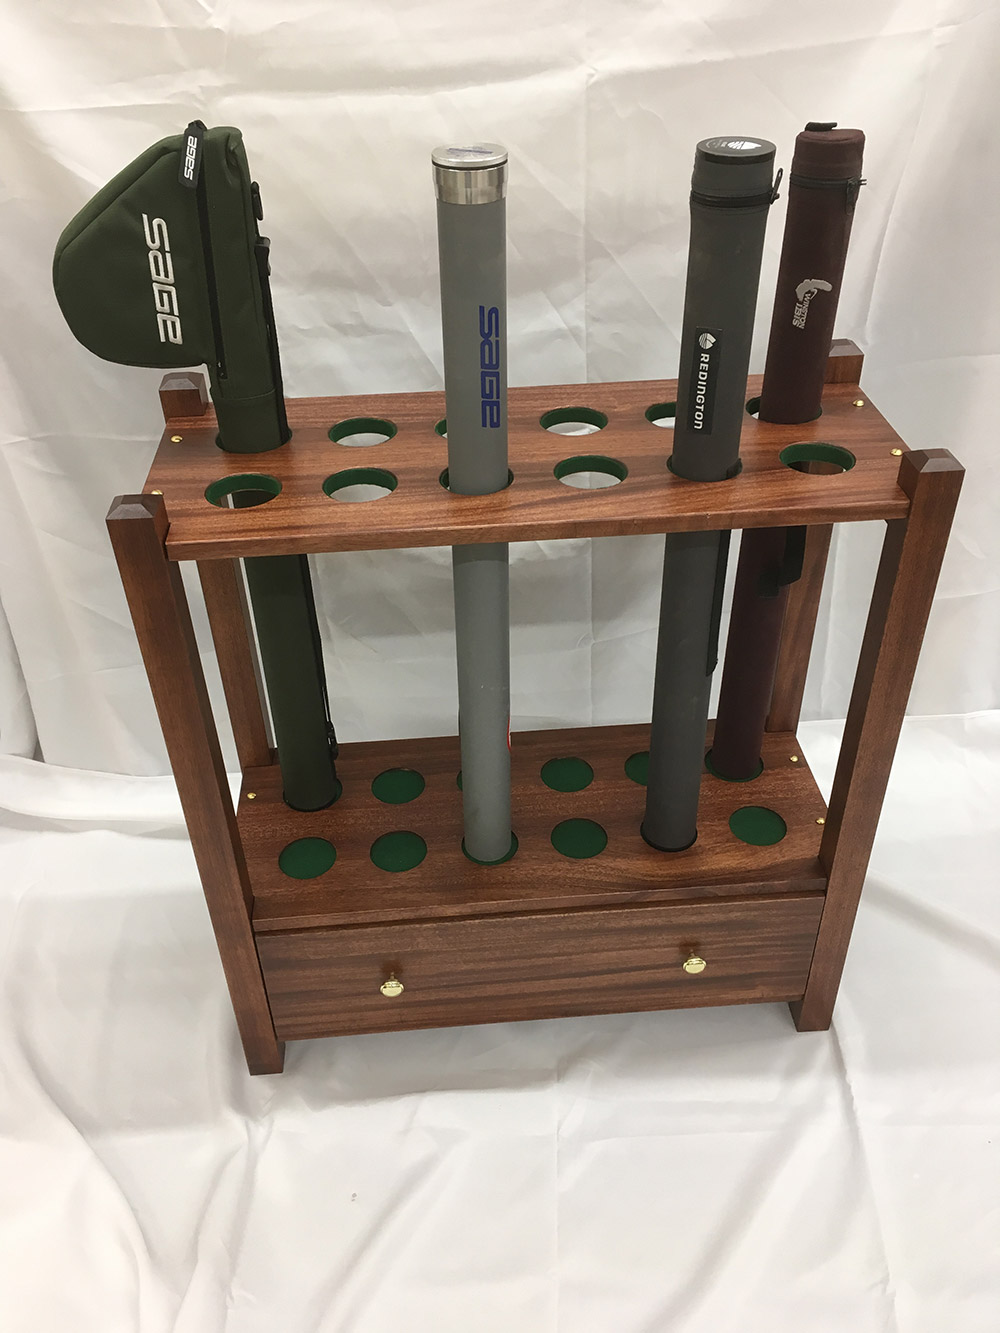 Display case for antique fly rods  Fly fishing, Fishing rod storage, Fishing  rod holder